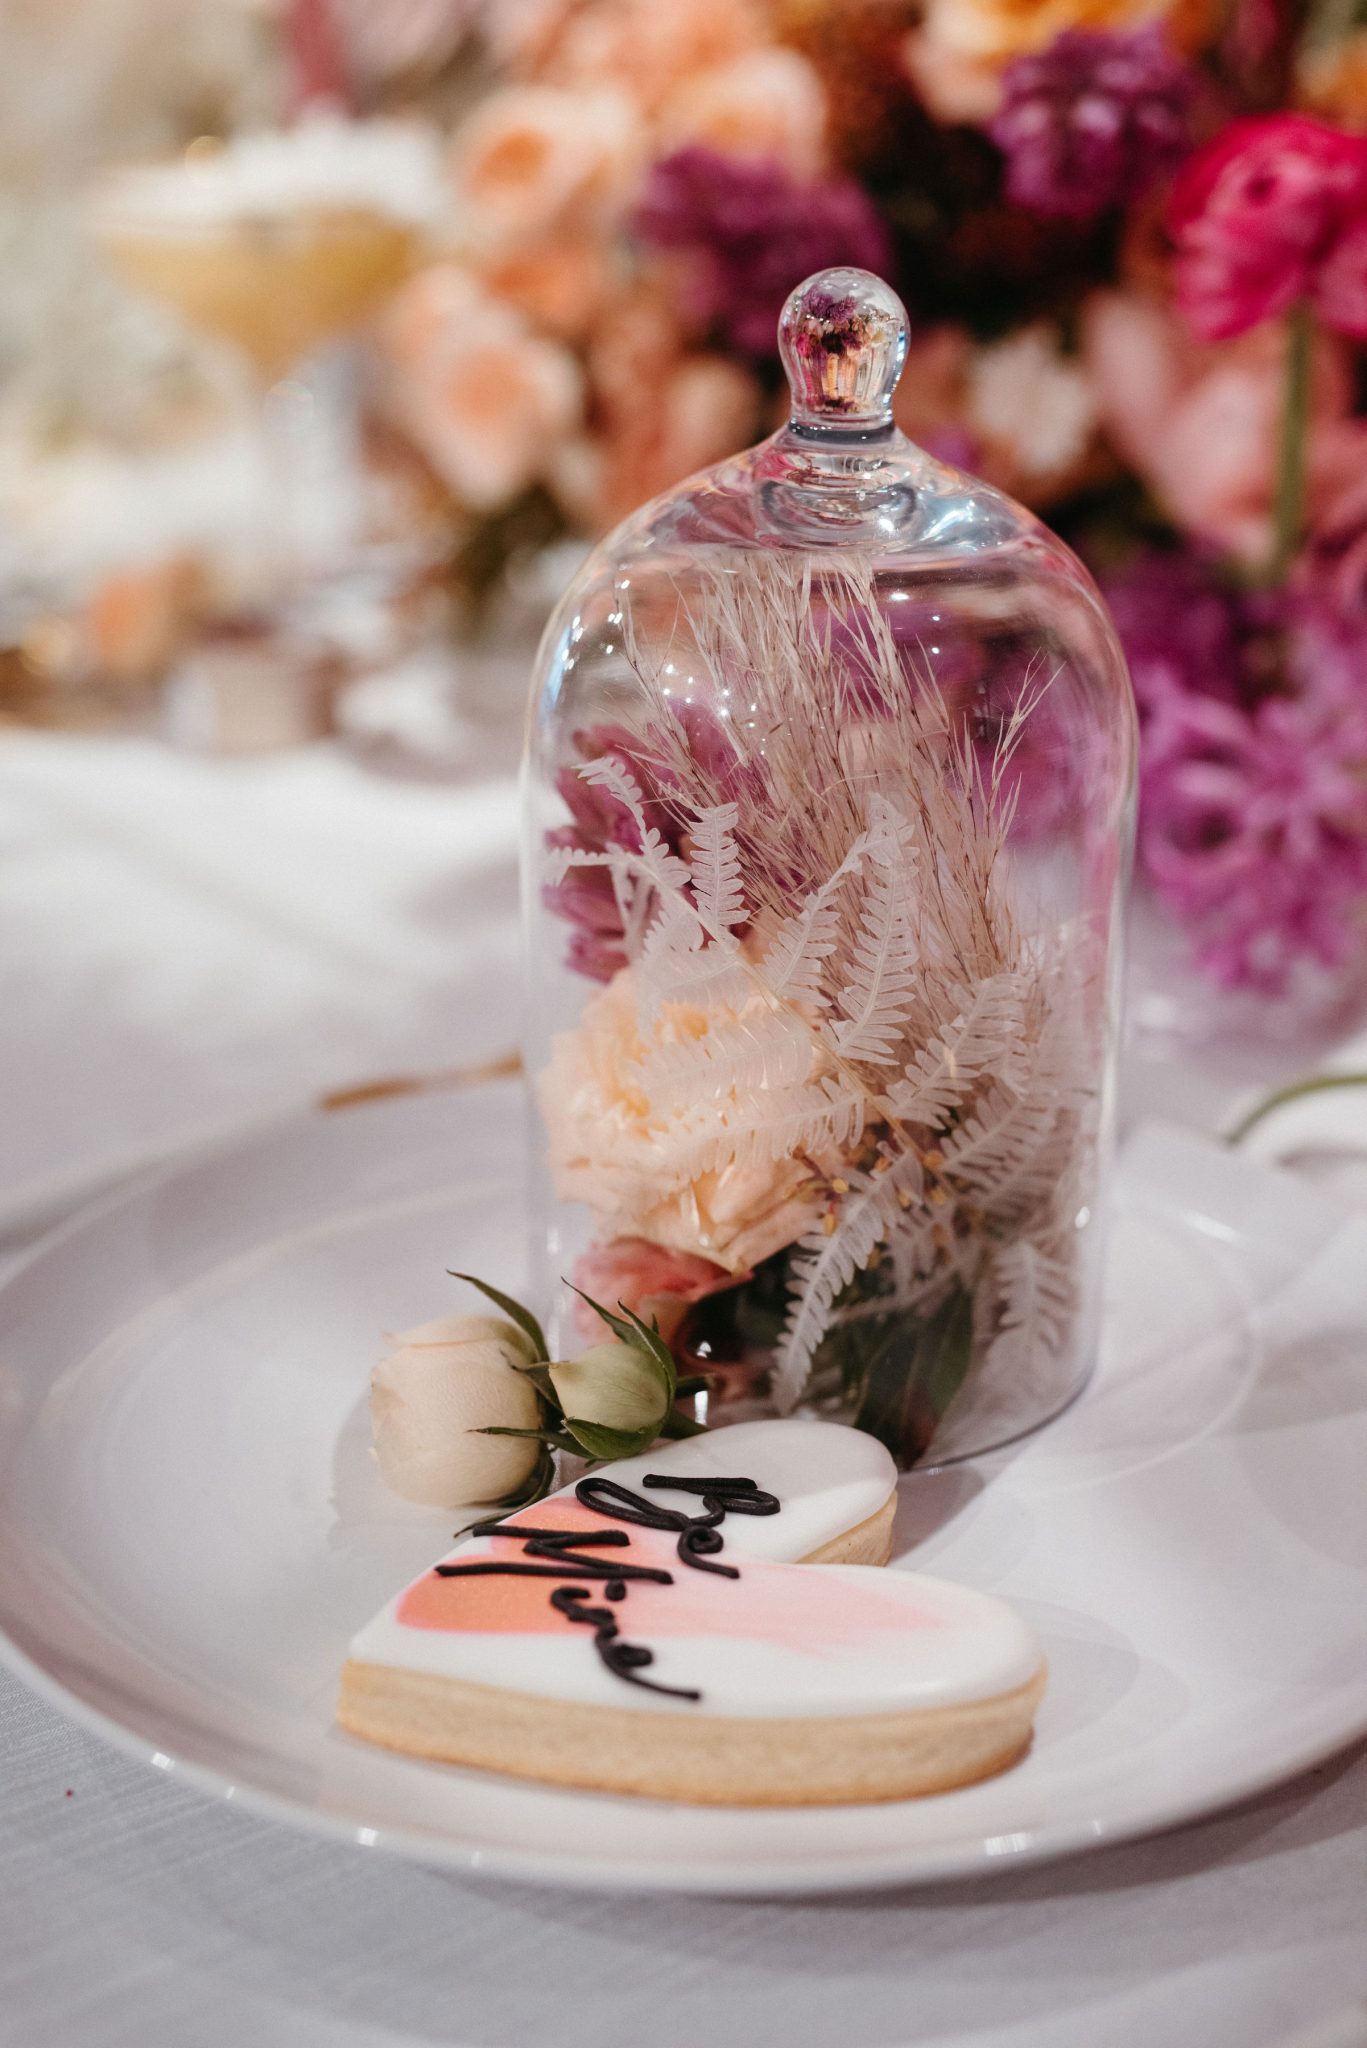 Pink ombre florals and heart shaped cookies for wedding decor inspiration